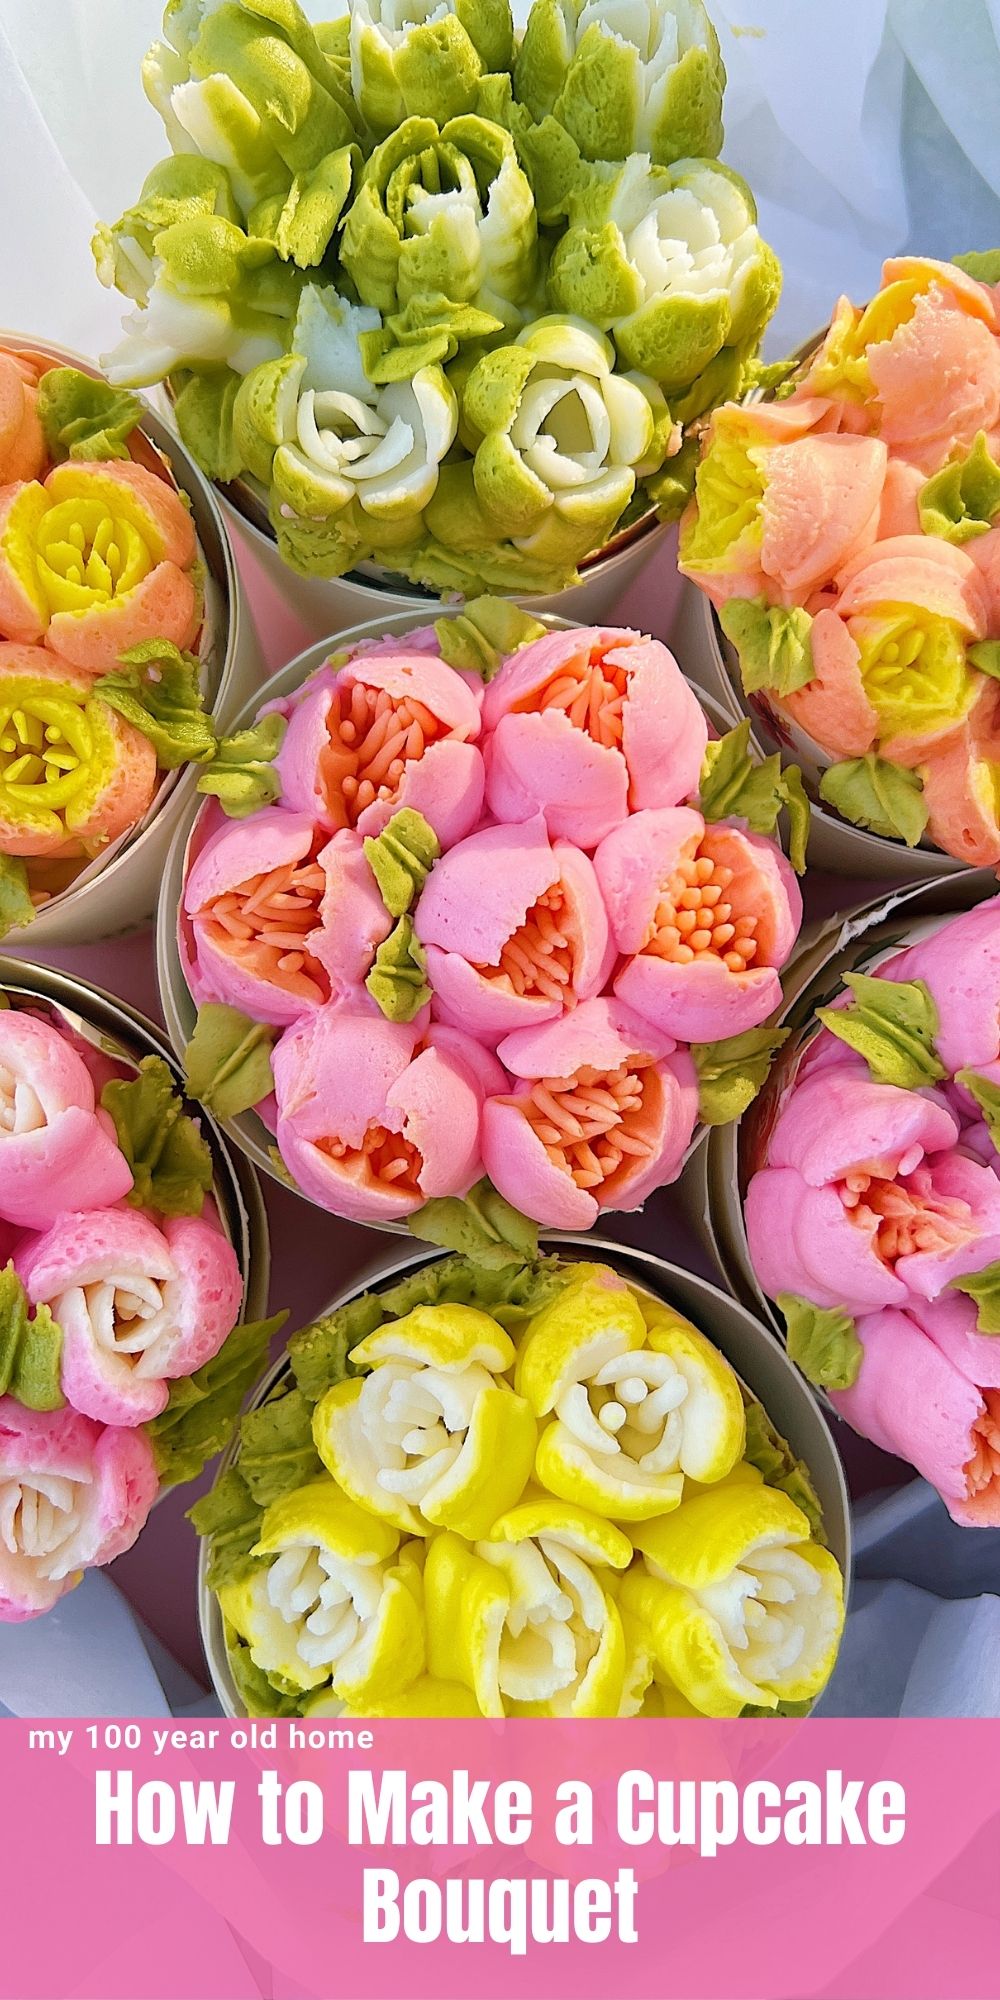 Is there anything more delightful than a bouquet of fresh flowers? Perhaps, if it were a delicious cupcake bouquet instead!